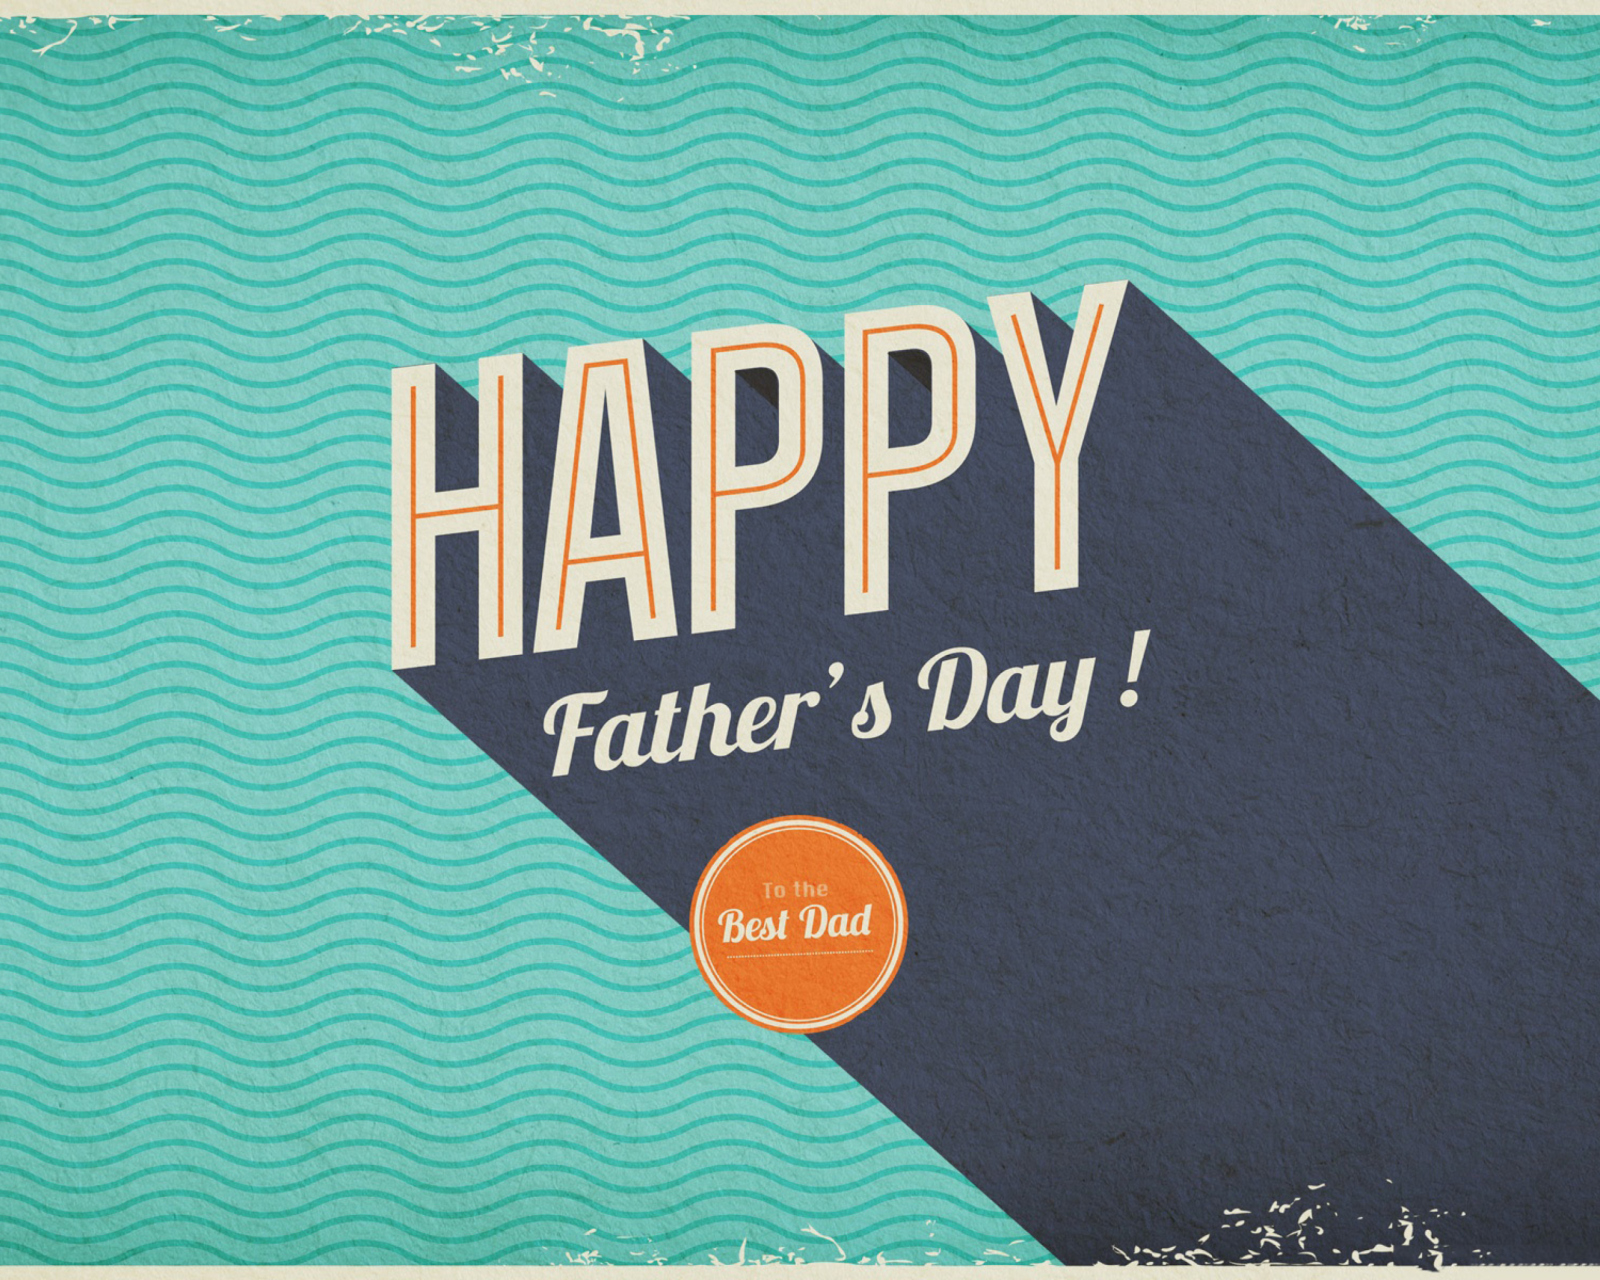 Happy Fathers Day wallpaper 1600x1280